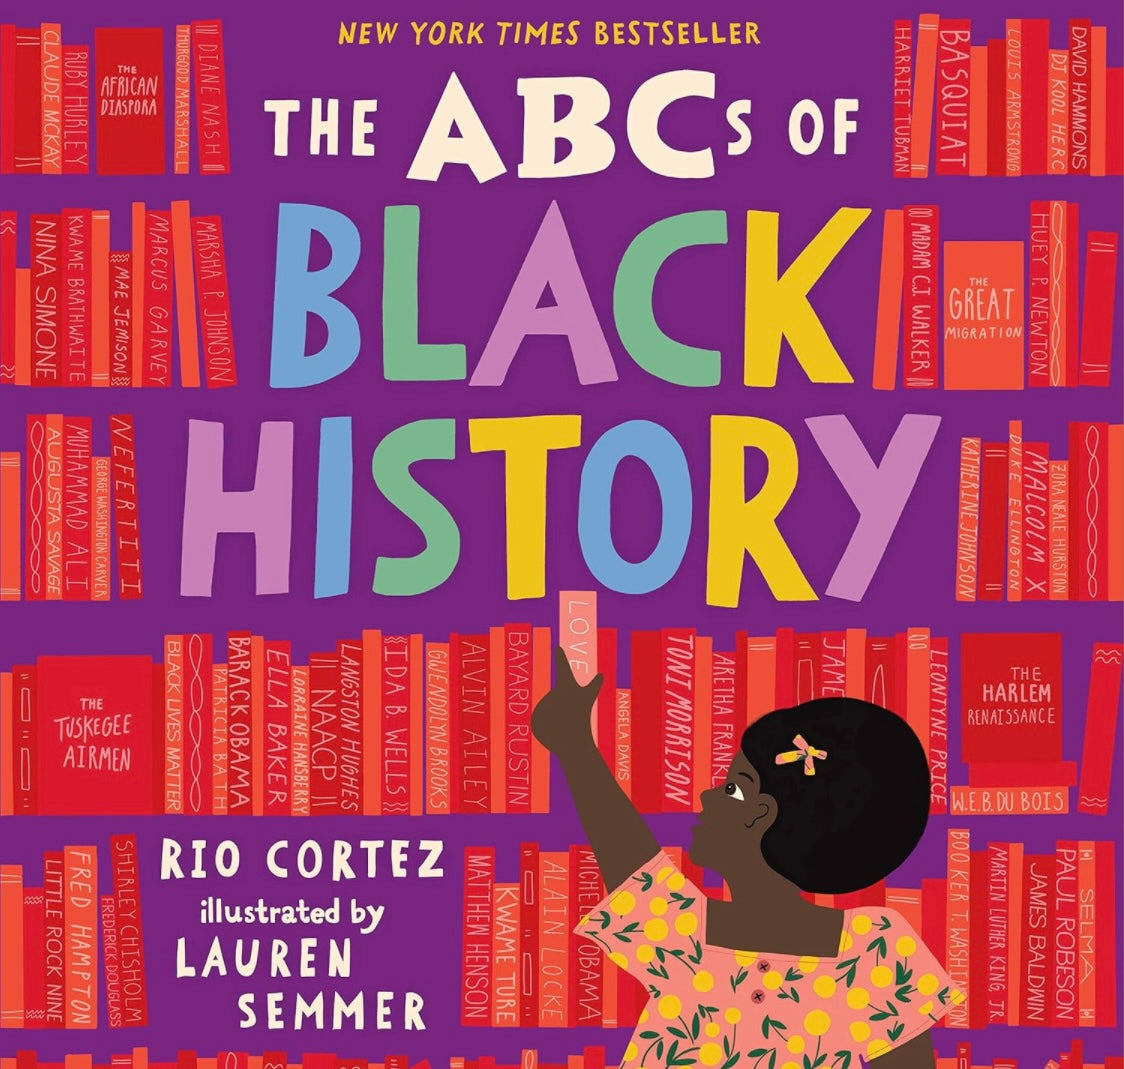 The ABC’s of Black History